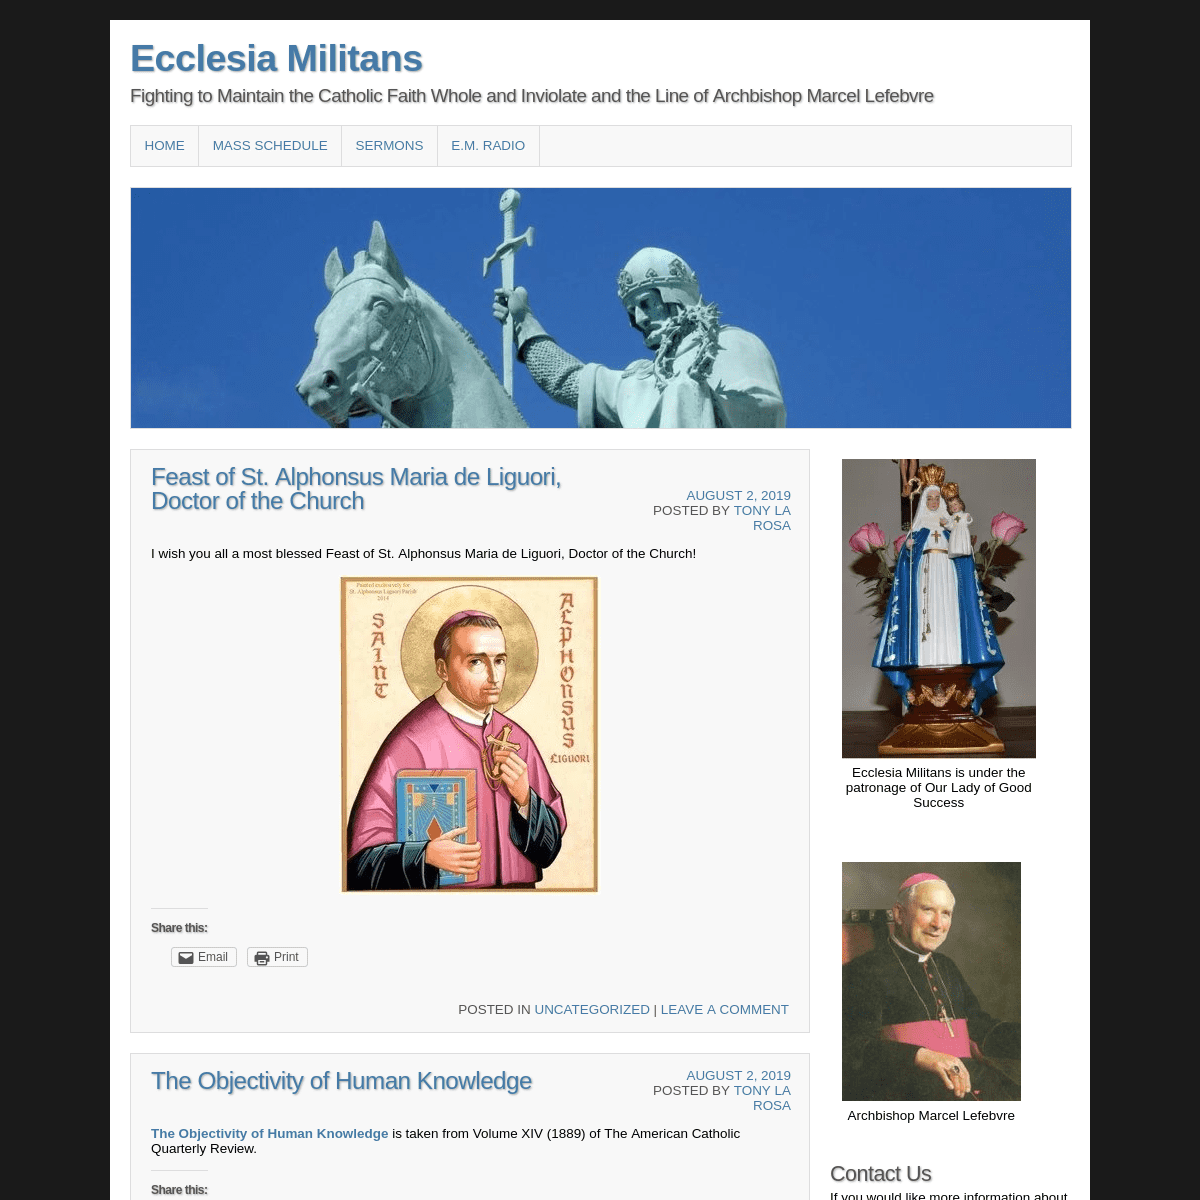 Ecclesia Militans | Fighting to Maintain the Catholic Faith Whole and Inviolate and the Line of Archbishop Marcel Lefebvre